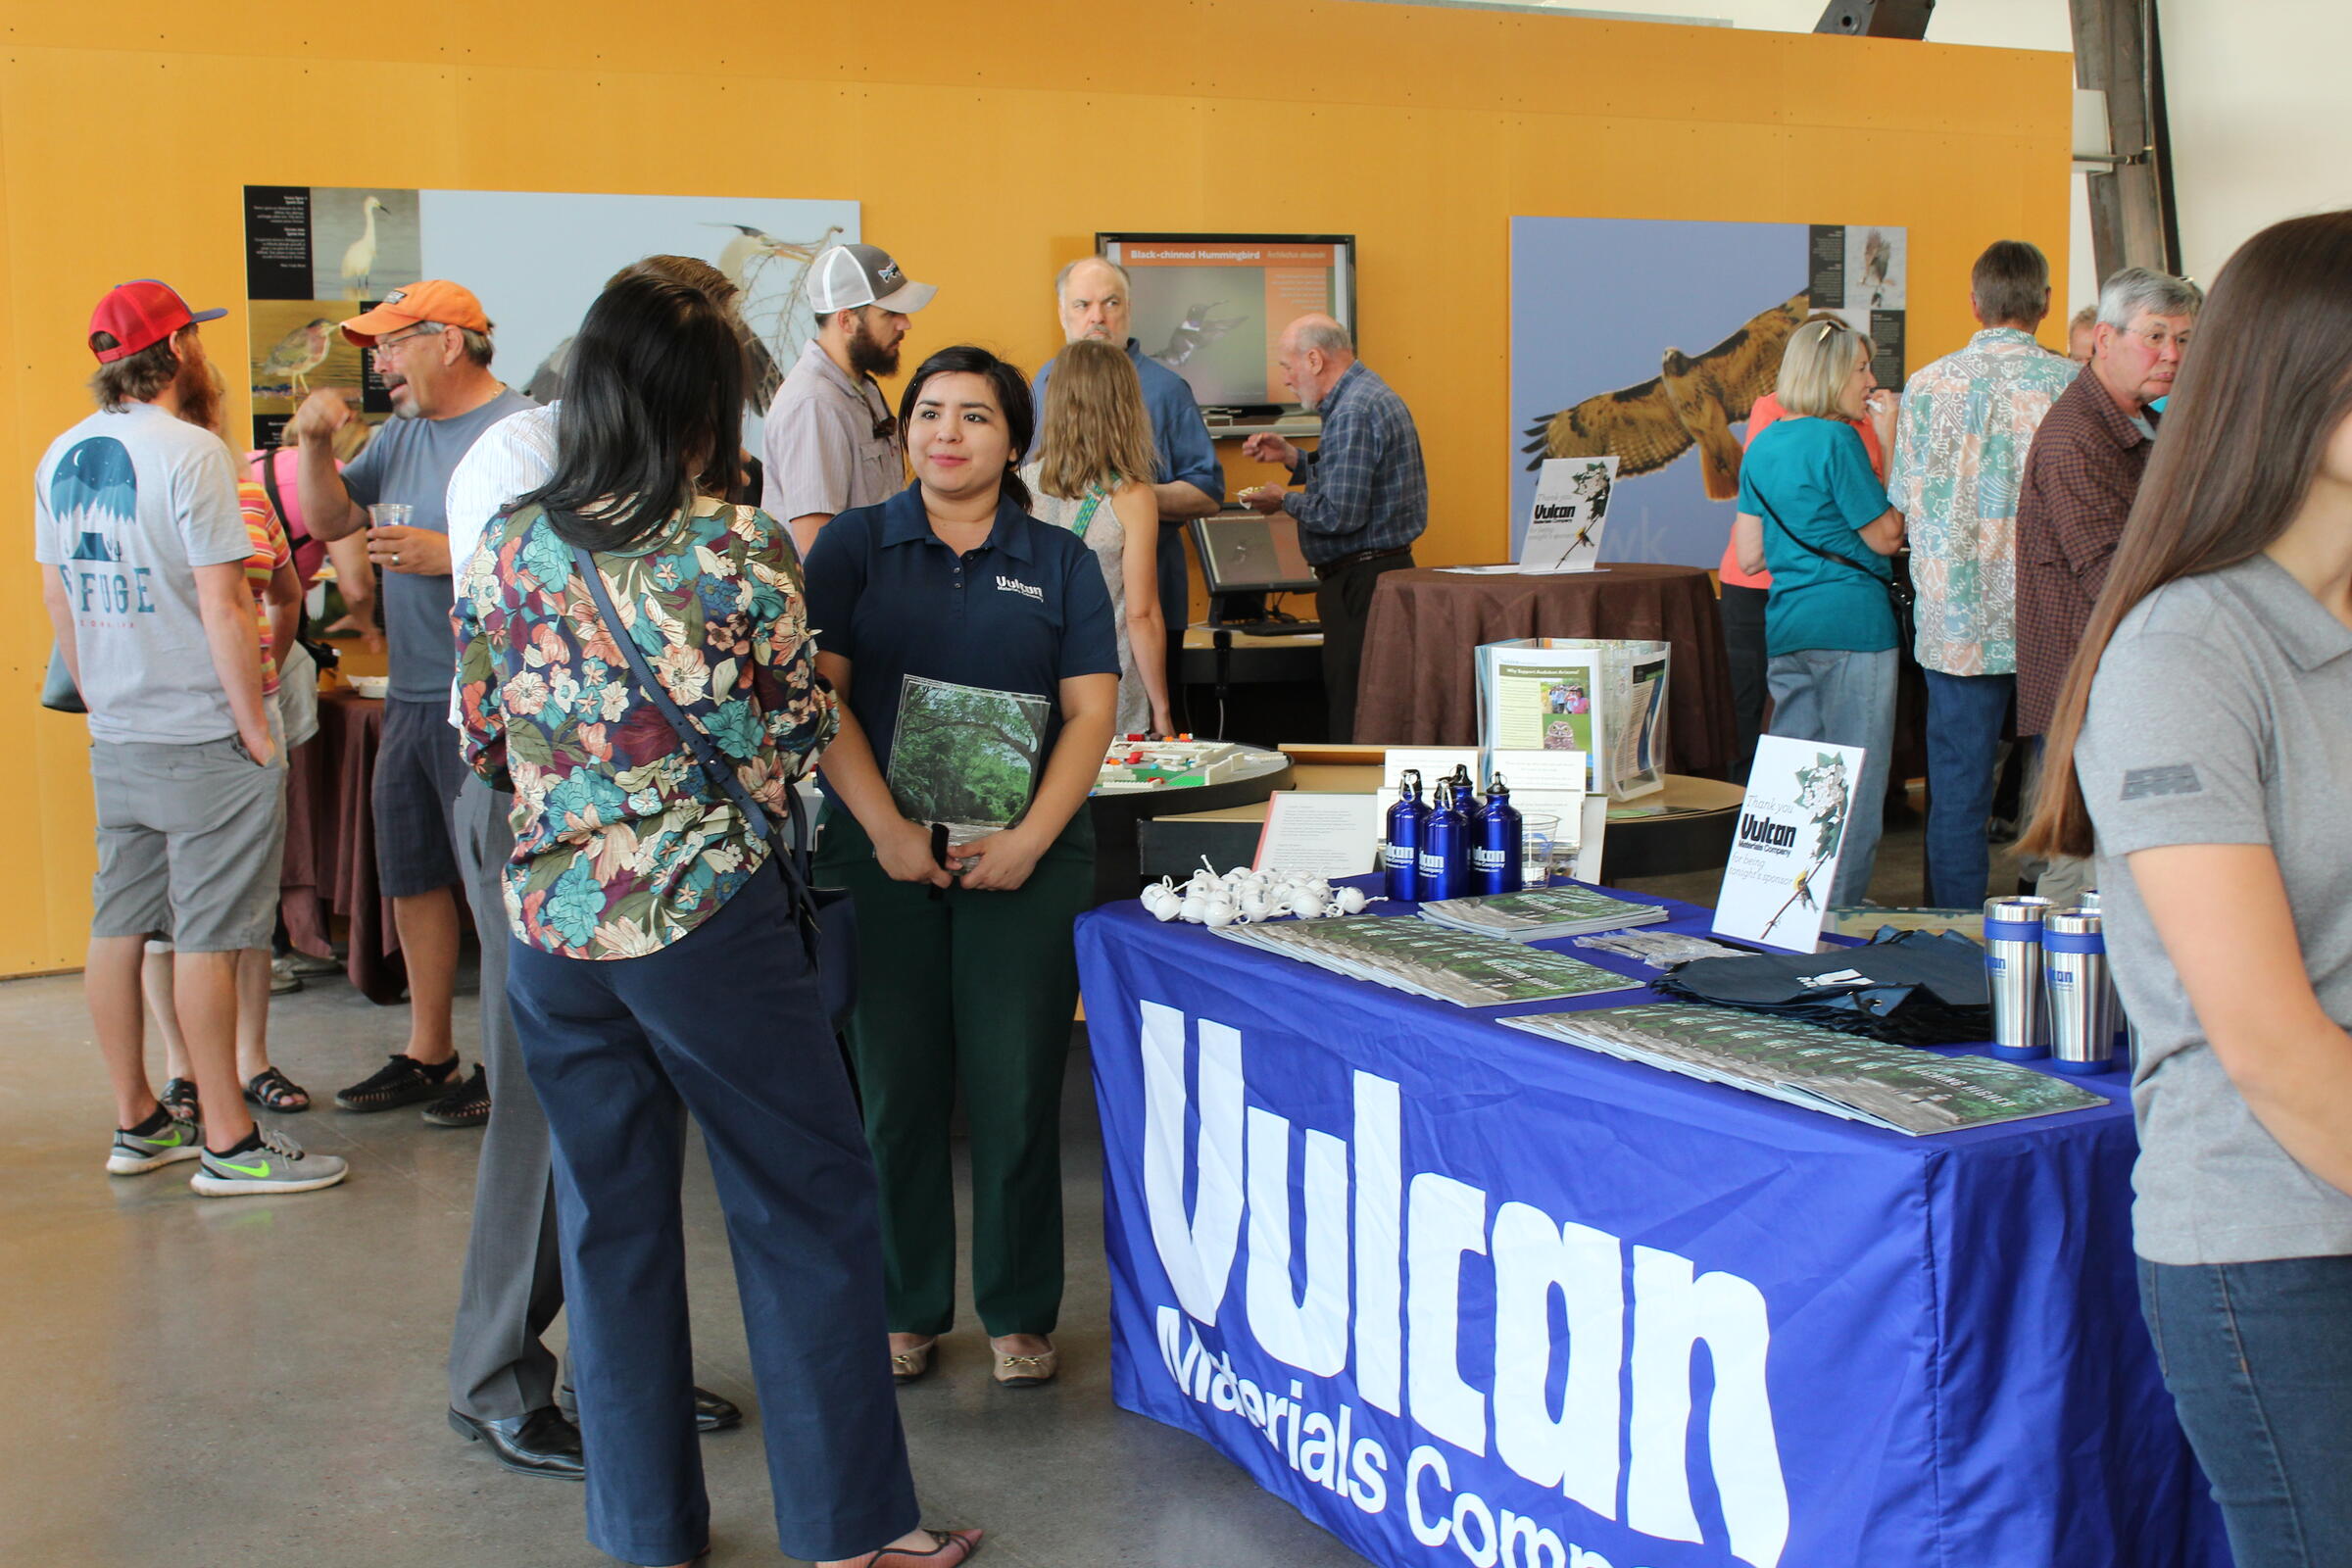 People mingle around the center and interact with a sponsorship booth from Vulcan Materials company during Birds n' Beer.